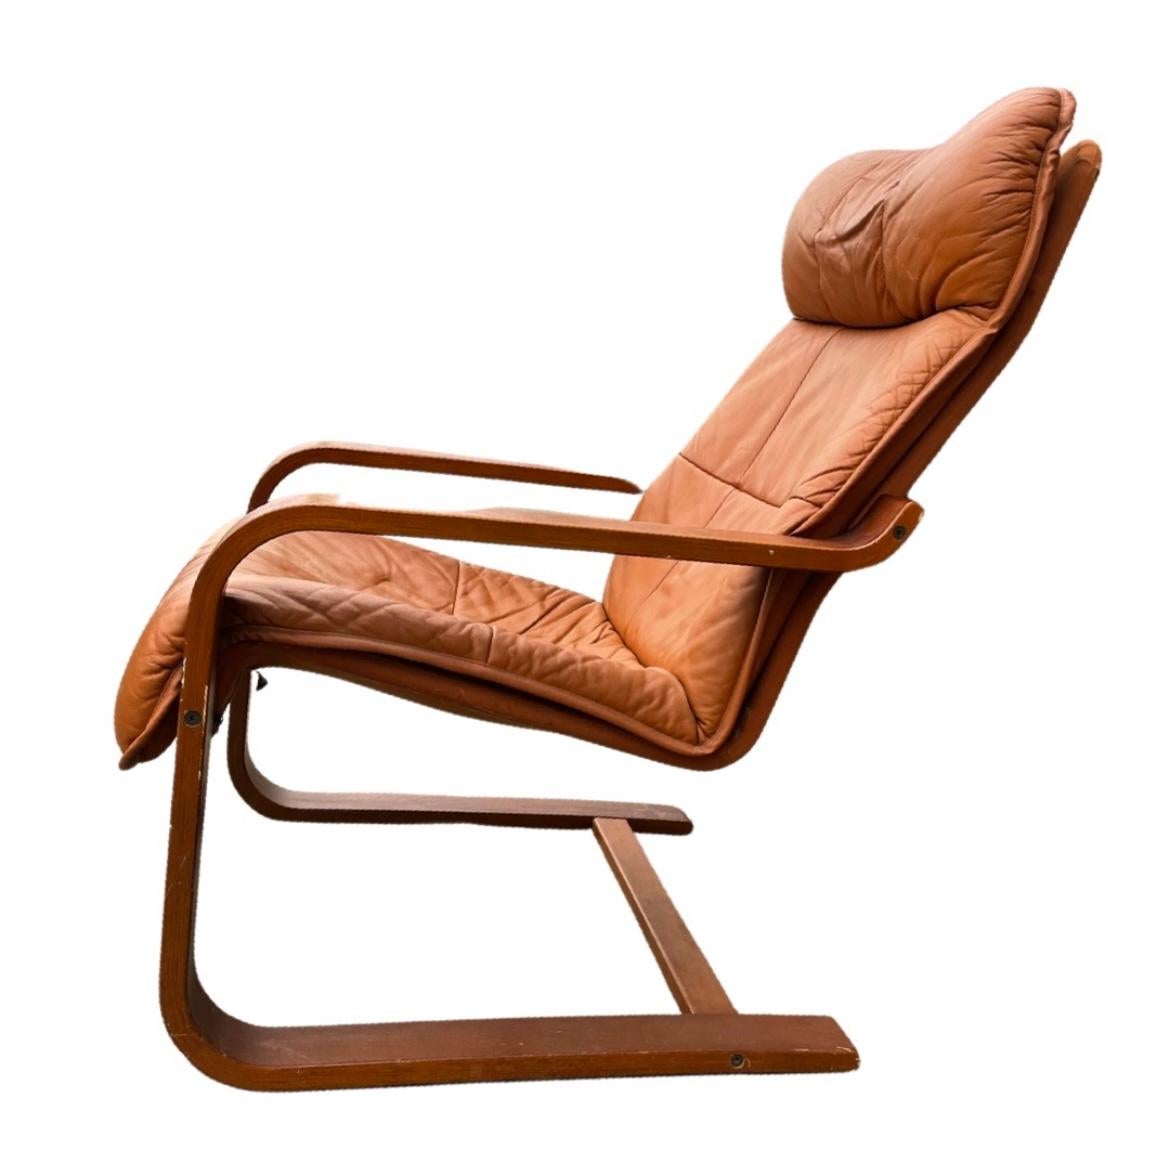 The most comfortable lounge chair you will sit in! Condition is good, there is wear in the leather due to use/ age. We are able to refinish the wood if requested. No original label present. 